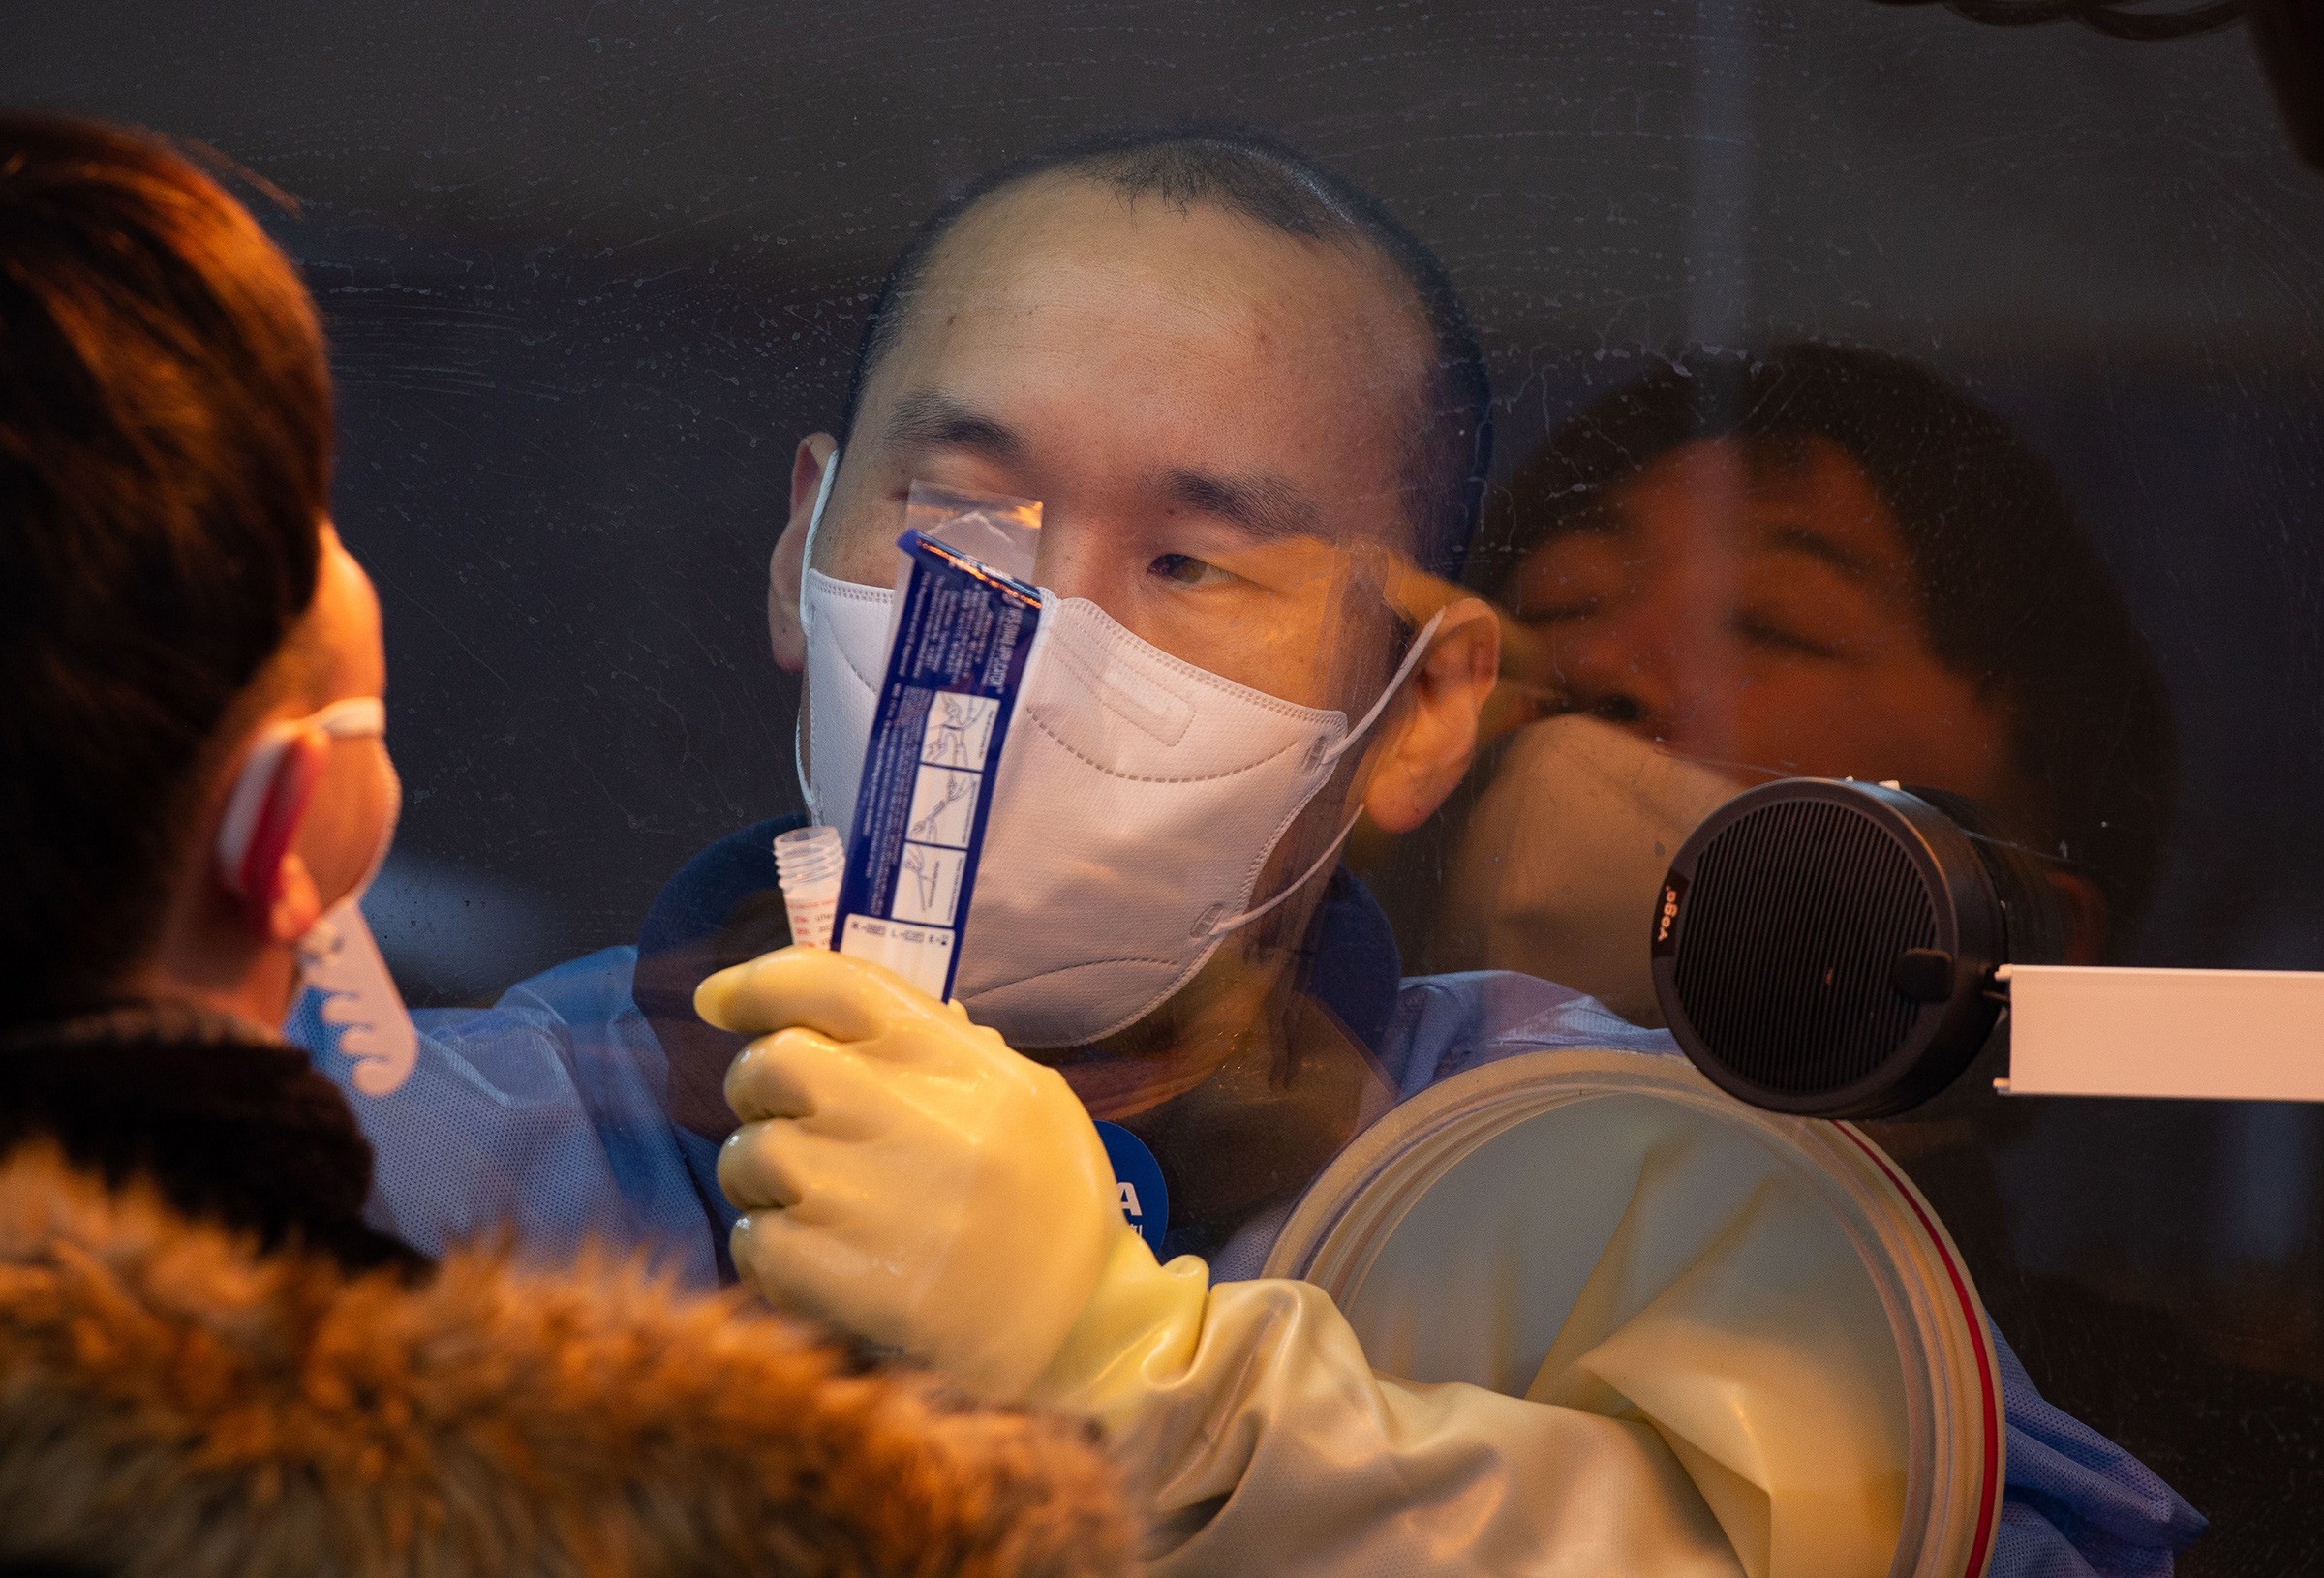 A health worker collects swabs from a citizen for COVID-19 testing at a makeshift clinic outside the Seoul city hall on Jan. 5 (Jeon Heon-Kyun—EPA-EFE/Shutterstock)